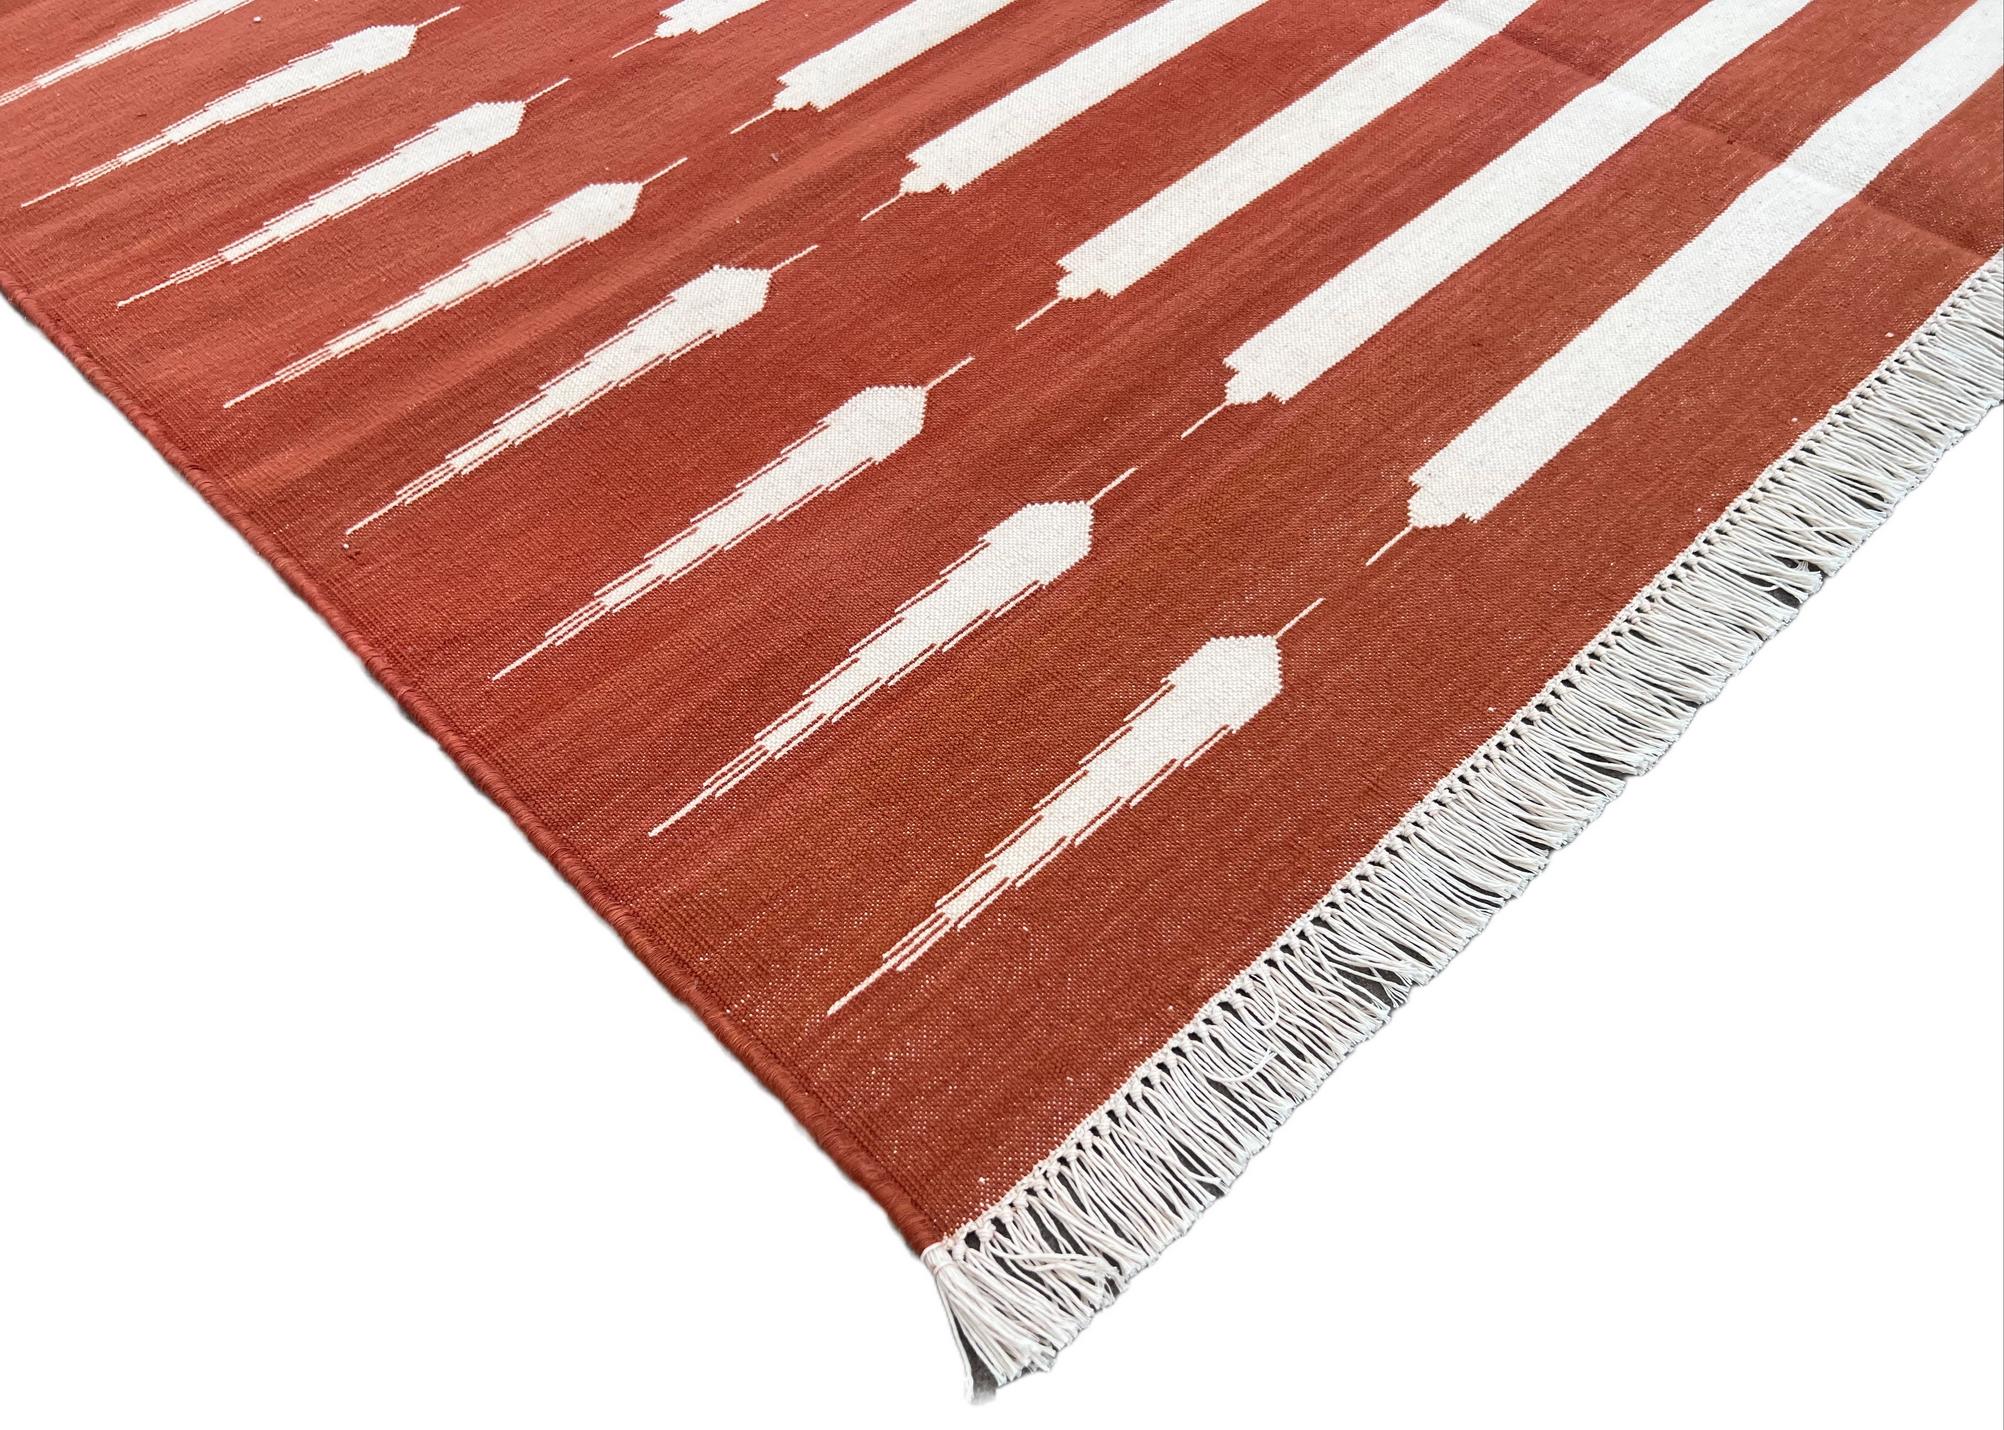 Hand-Woven Handmade Cotton Area Flat Weave Rug, 4x6 Tan And White Striped Indian Dhurrie For Sale